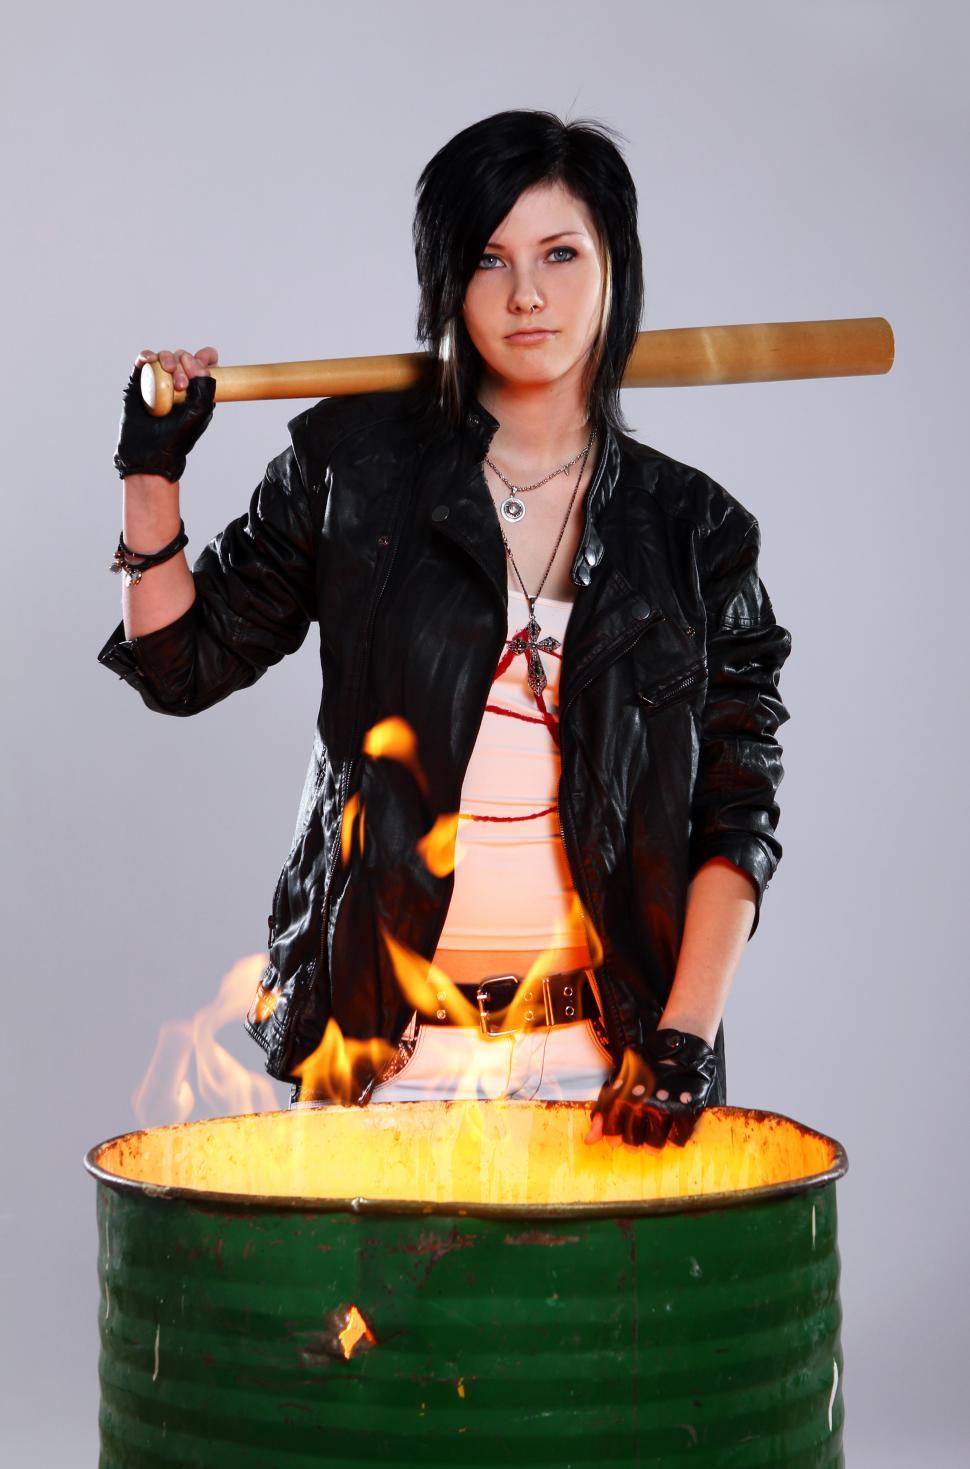 Free Image of Woman with bat by burning barrel  